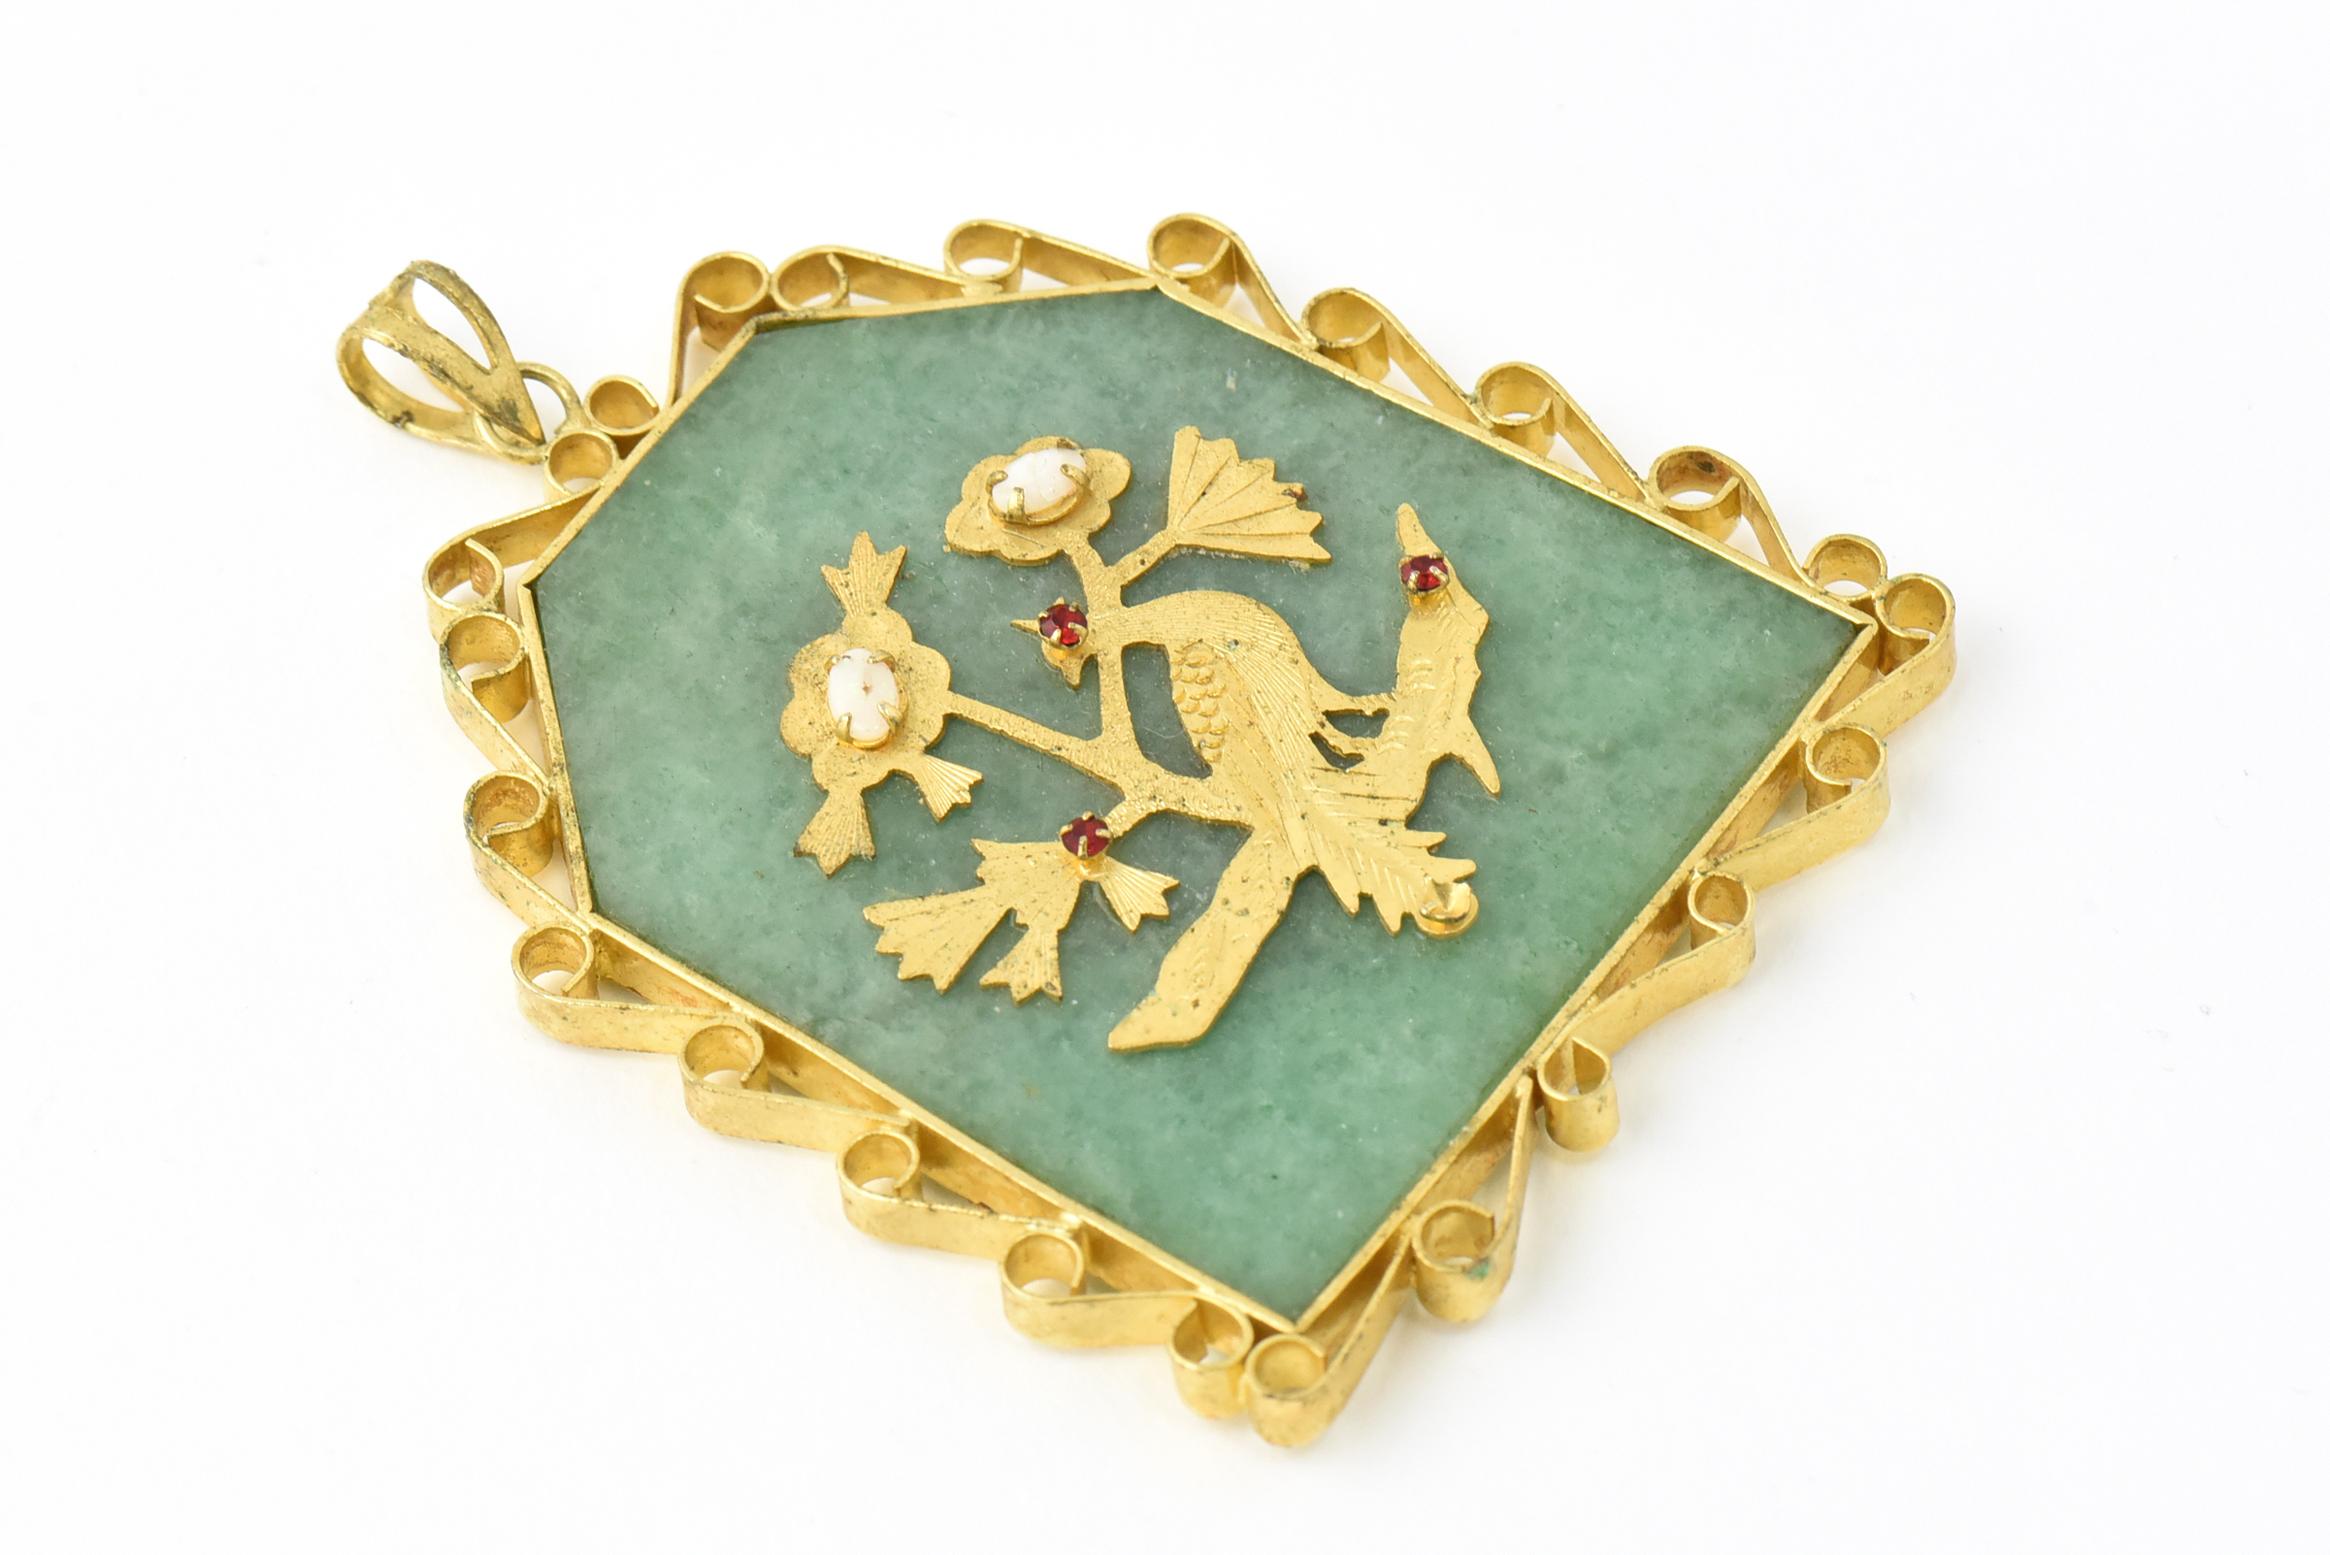 Asian-motif gold-plated pendant with scroll edges, dating from the 1950s to 1960s. One side features a Asian symbol and the other side has a bird sitting on a branch with opal flowers and faux-ruby accents. Age wear, tarnished, crack in opal.
